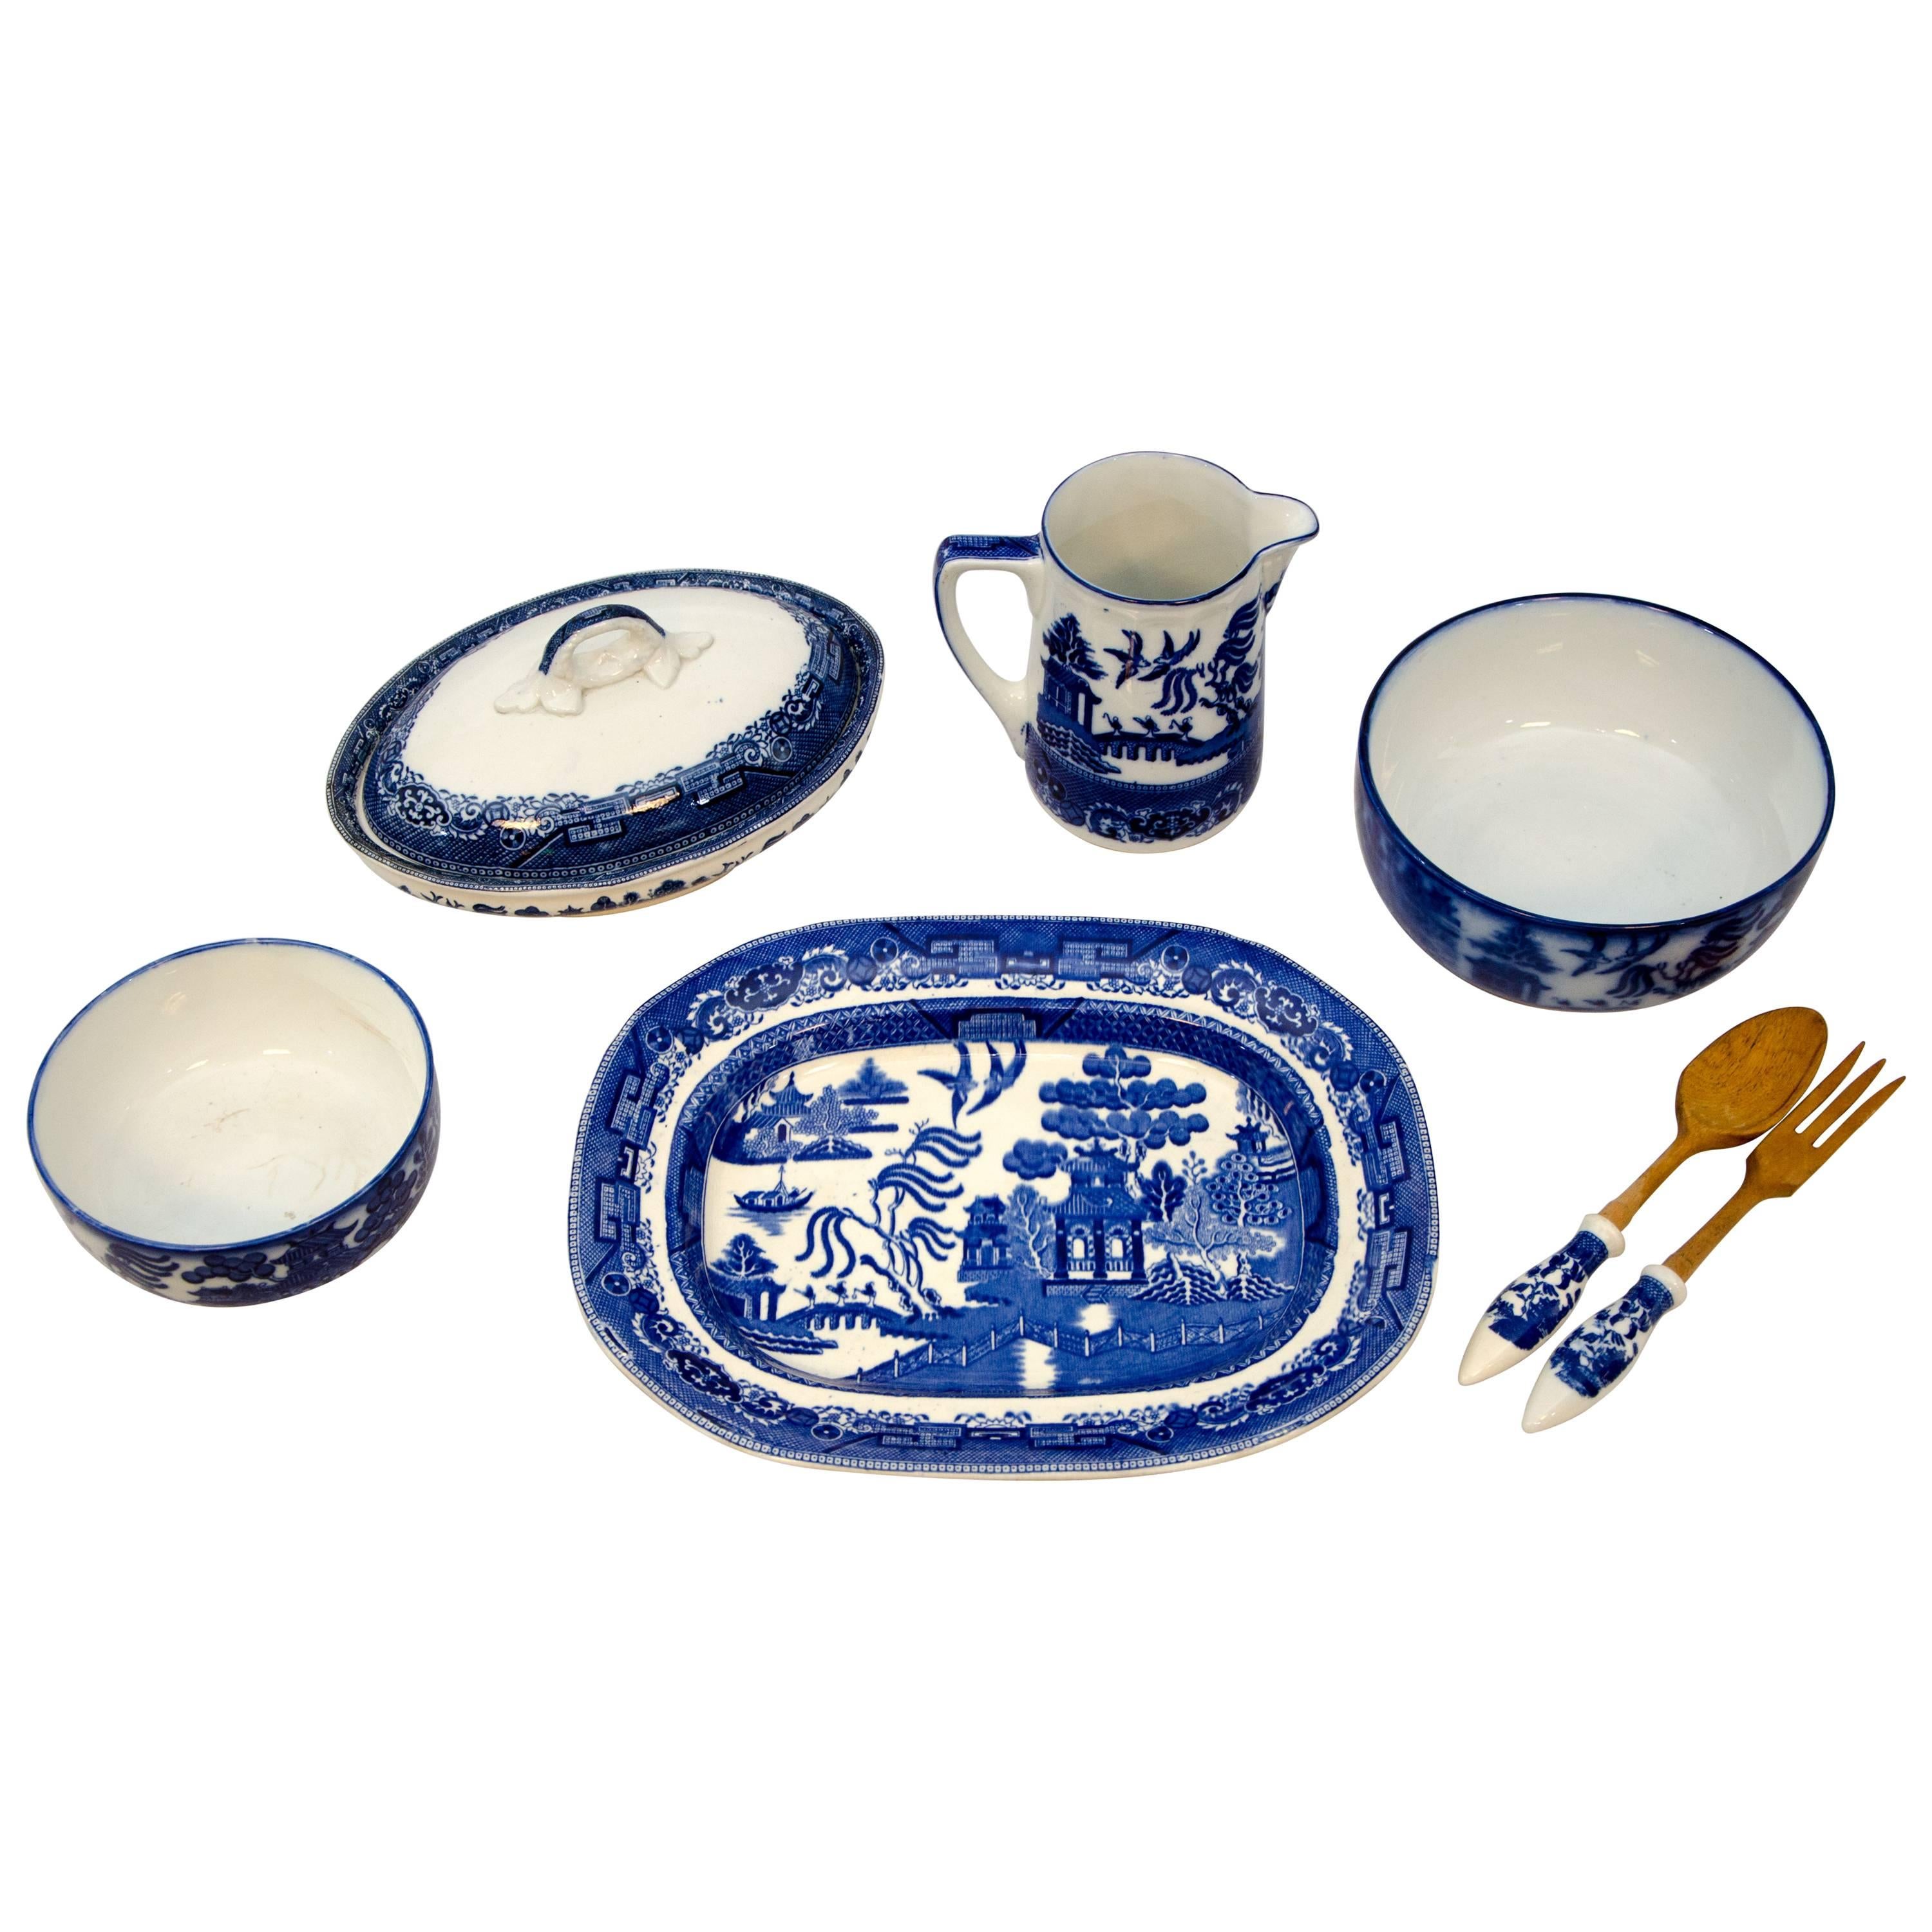 Eight-Piece Collection of English Blue Willow China Serving Pieces For Sale